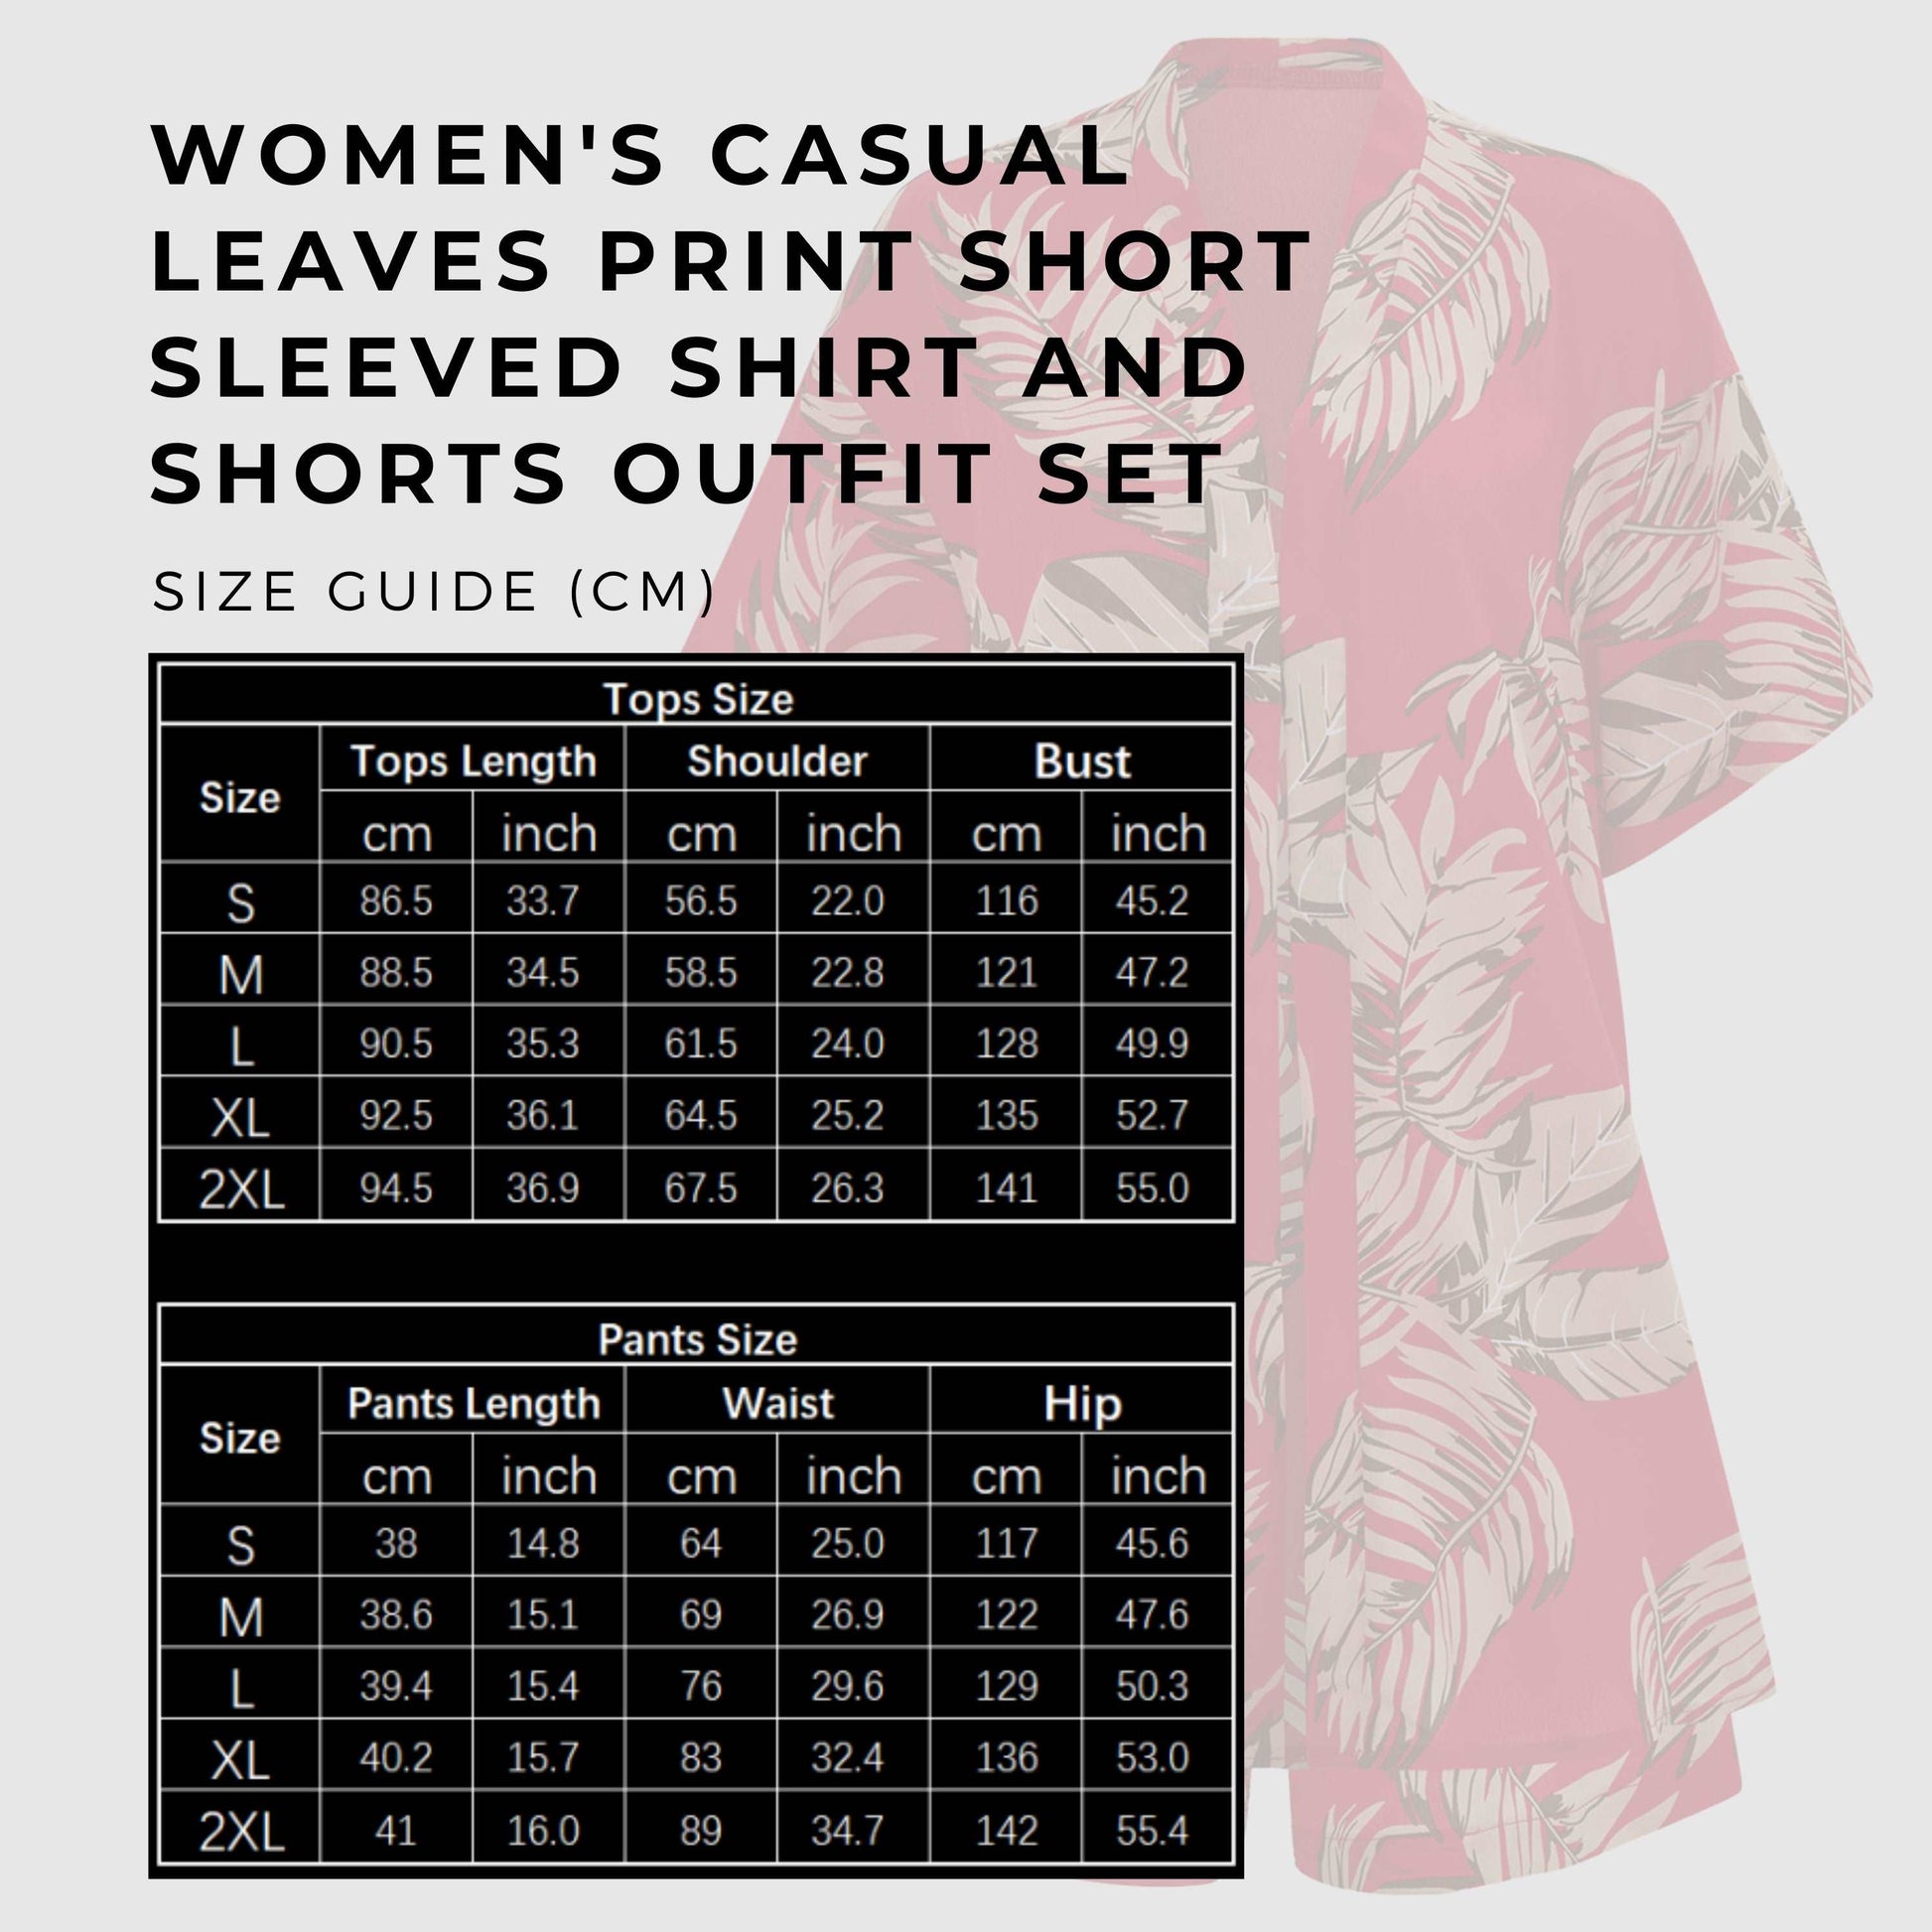 Women's Casual Leaves Print Short Sleeved Shirt And Shorts Outfit Set